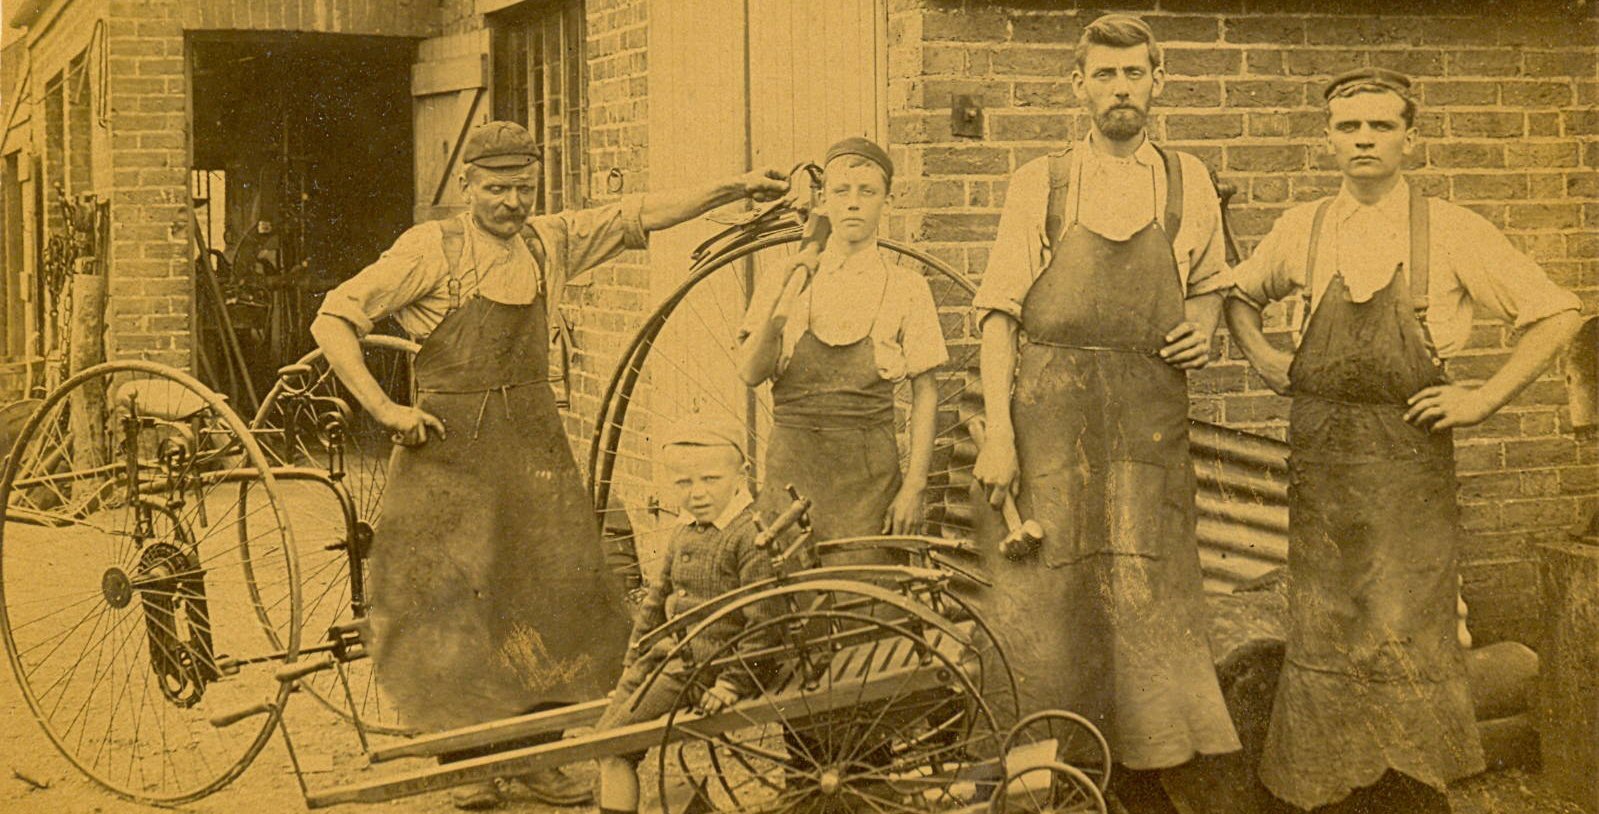 ‘Rural Wight In Bygone Days’ by Hilary Scammell (pub. IW Council): Frank Coombes Blacksmiths’ premises at Avenue Road, Sandown. The staff posing in their leather aprons are, left to right: Frank Coombes, Alan Butchers apprentice, Derek and Fred Cooper and the young Ken Locke in front, date c1910.